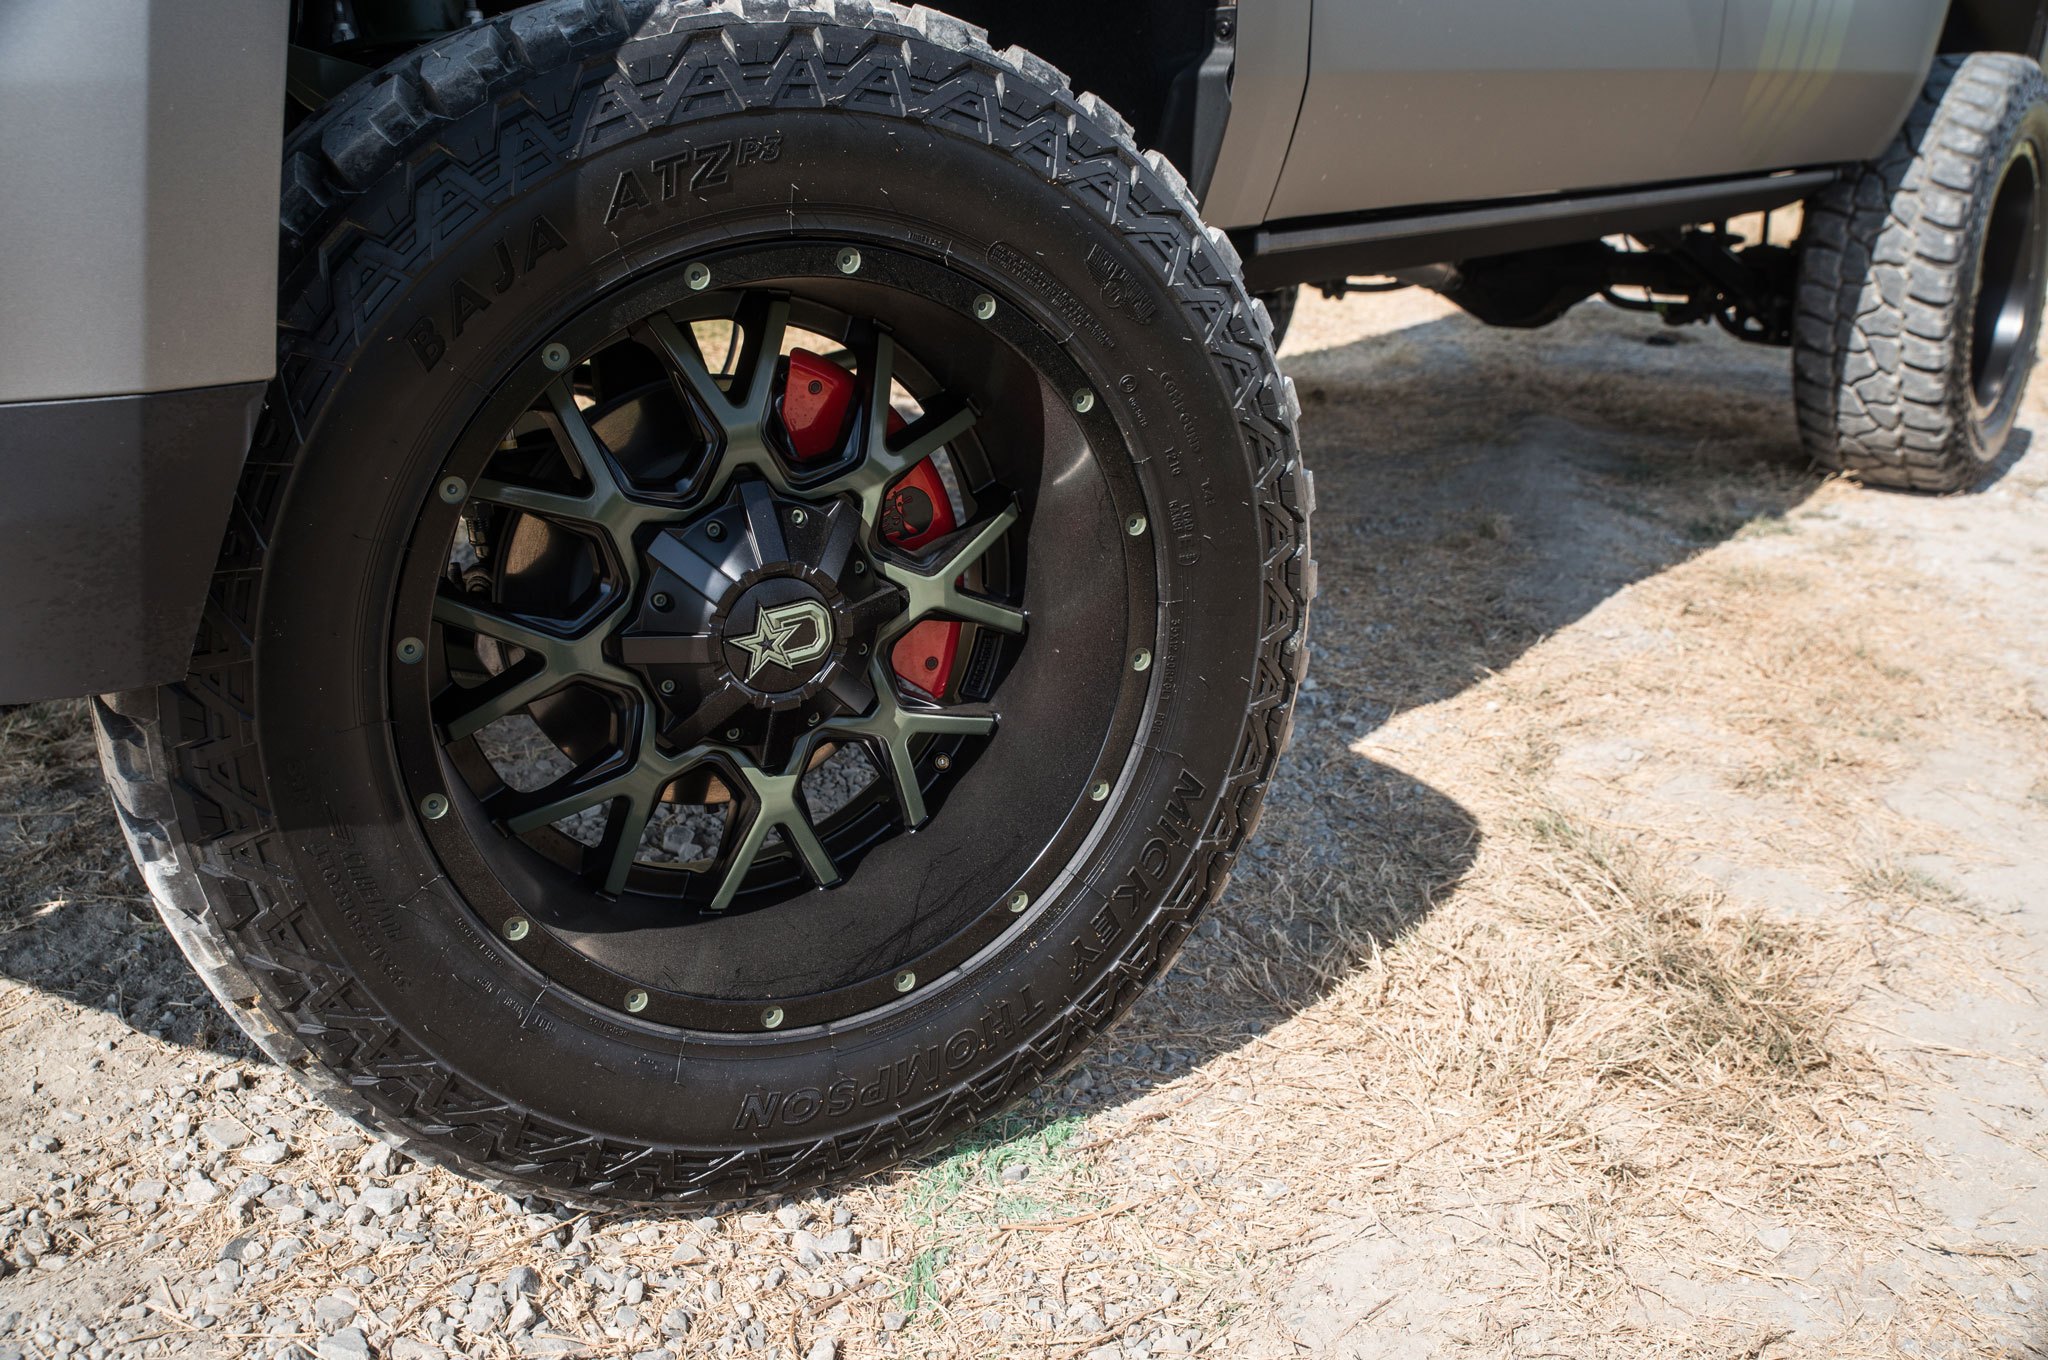 35 by 12.5 R20 Offroad Wheels on Gmc Yukon XL - Photo by Complete Customs